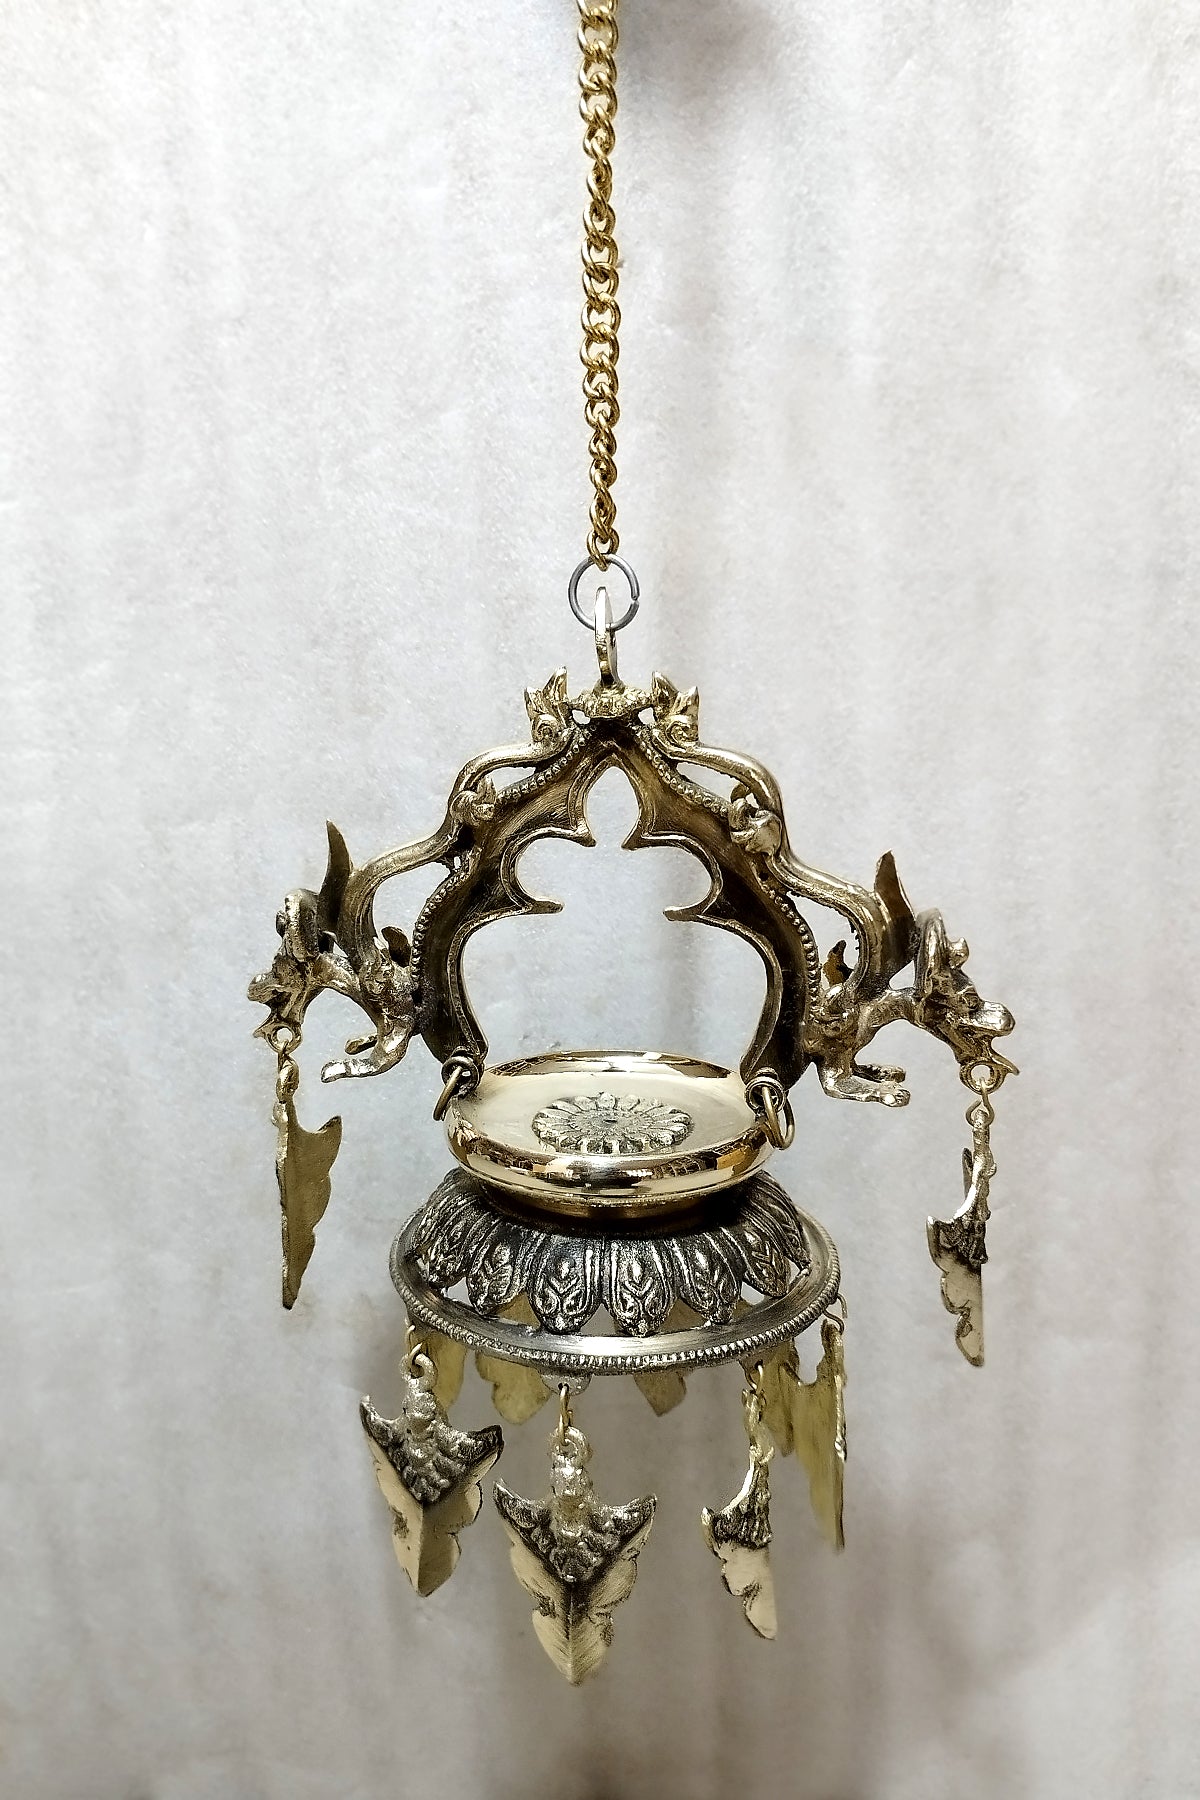 Hanging Oil Lamp From Nepal, Dalucha